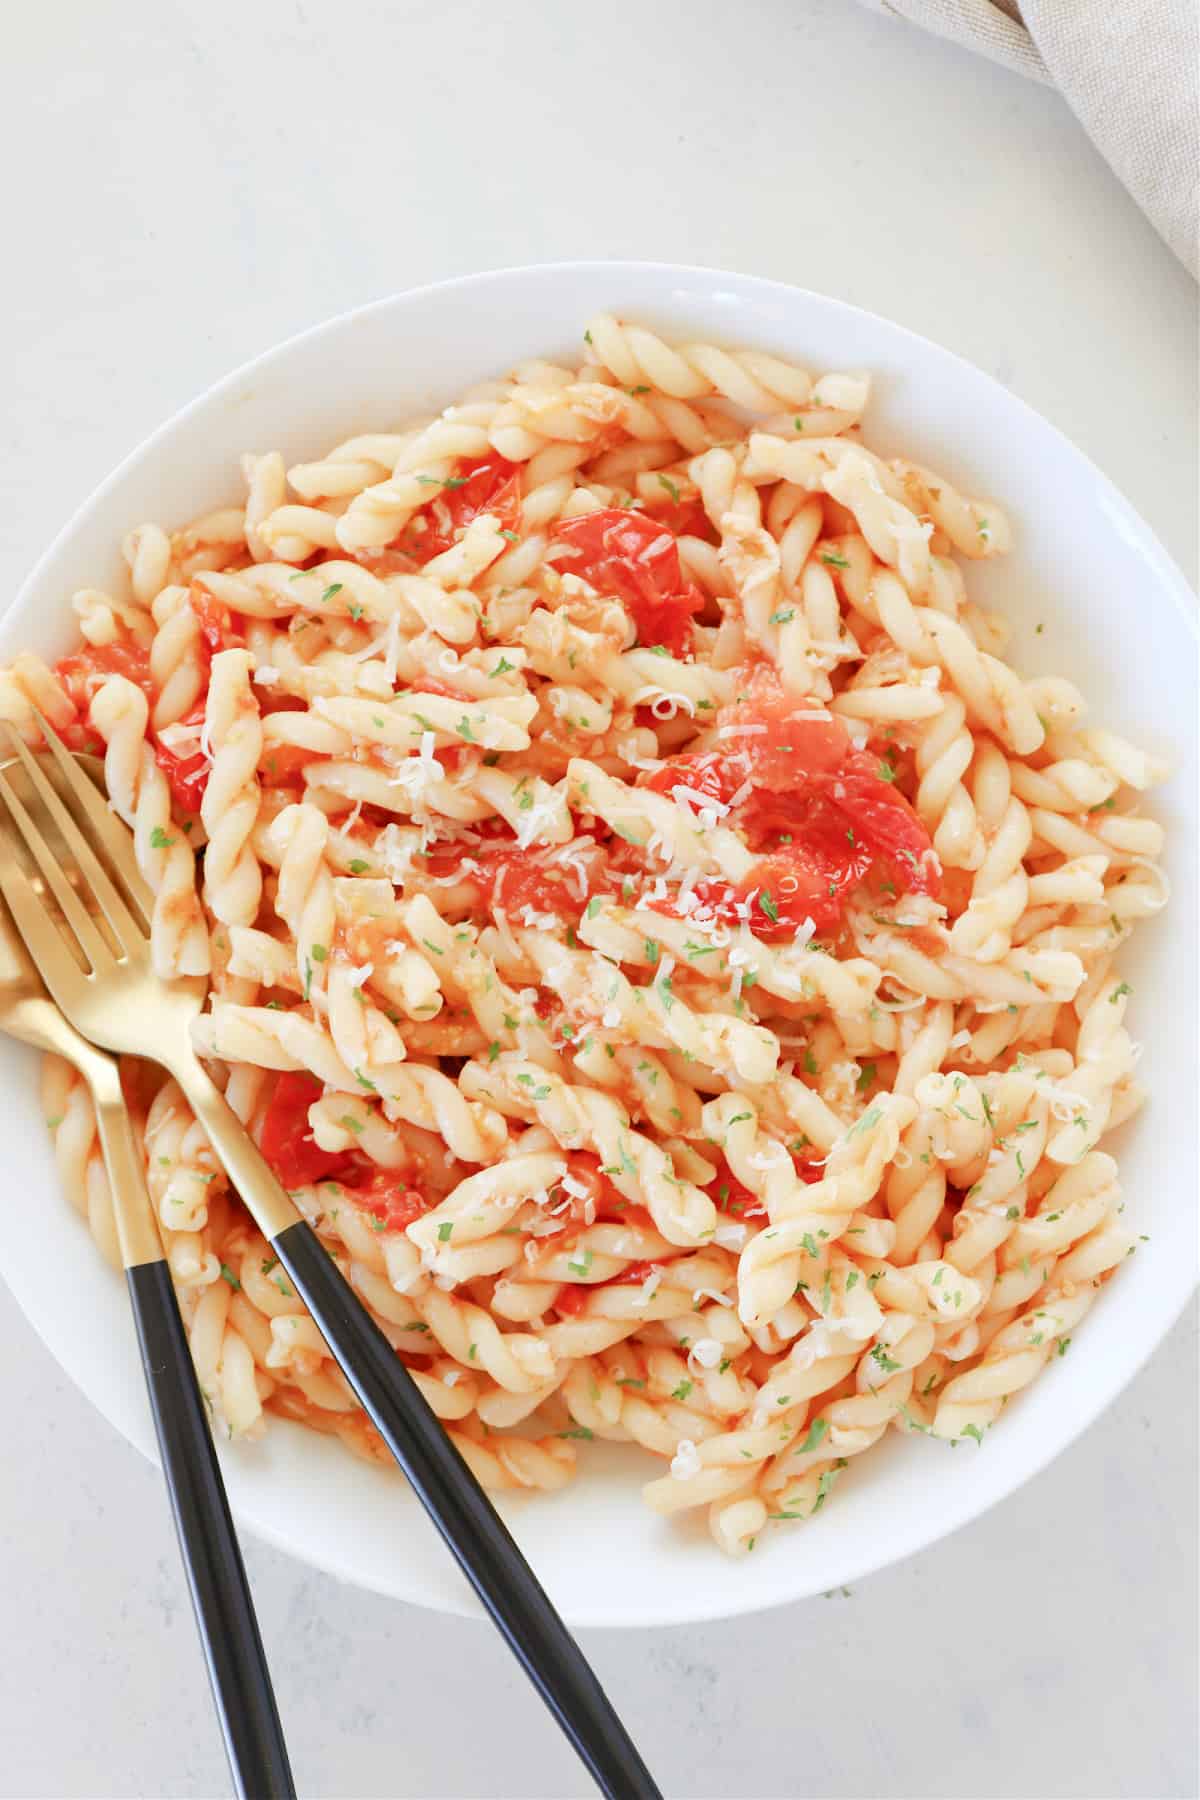 Pasta in a bowl with fork and spoon.